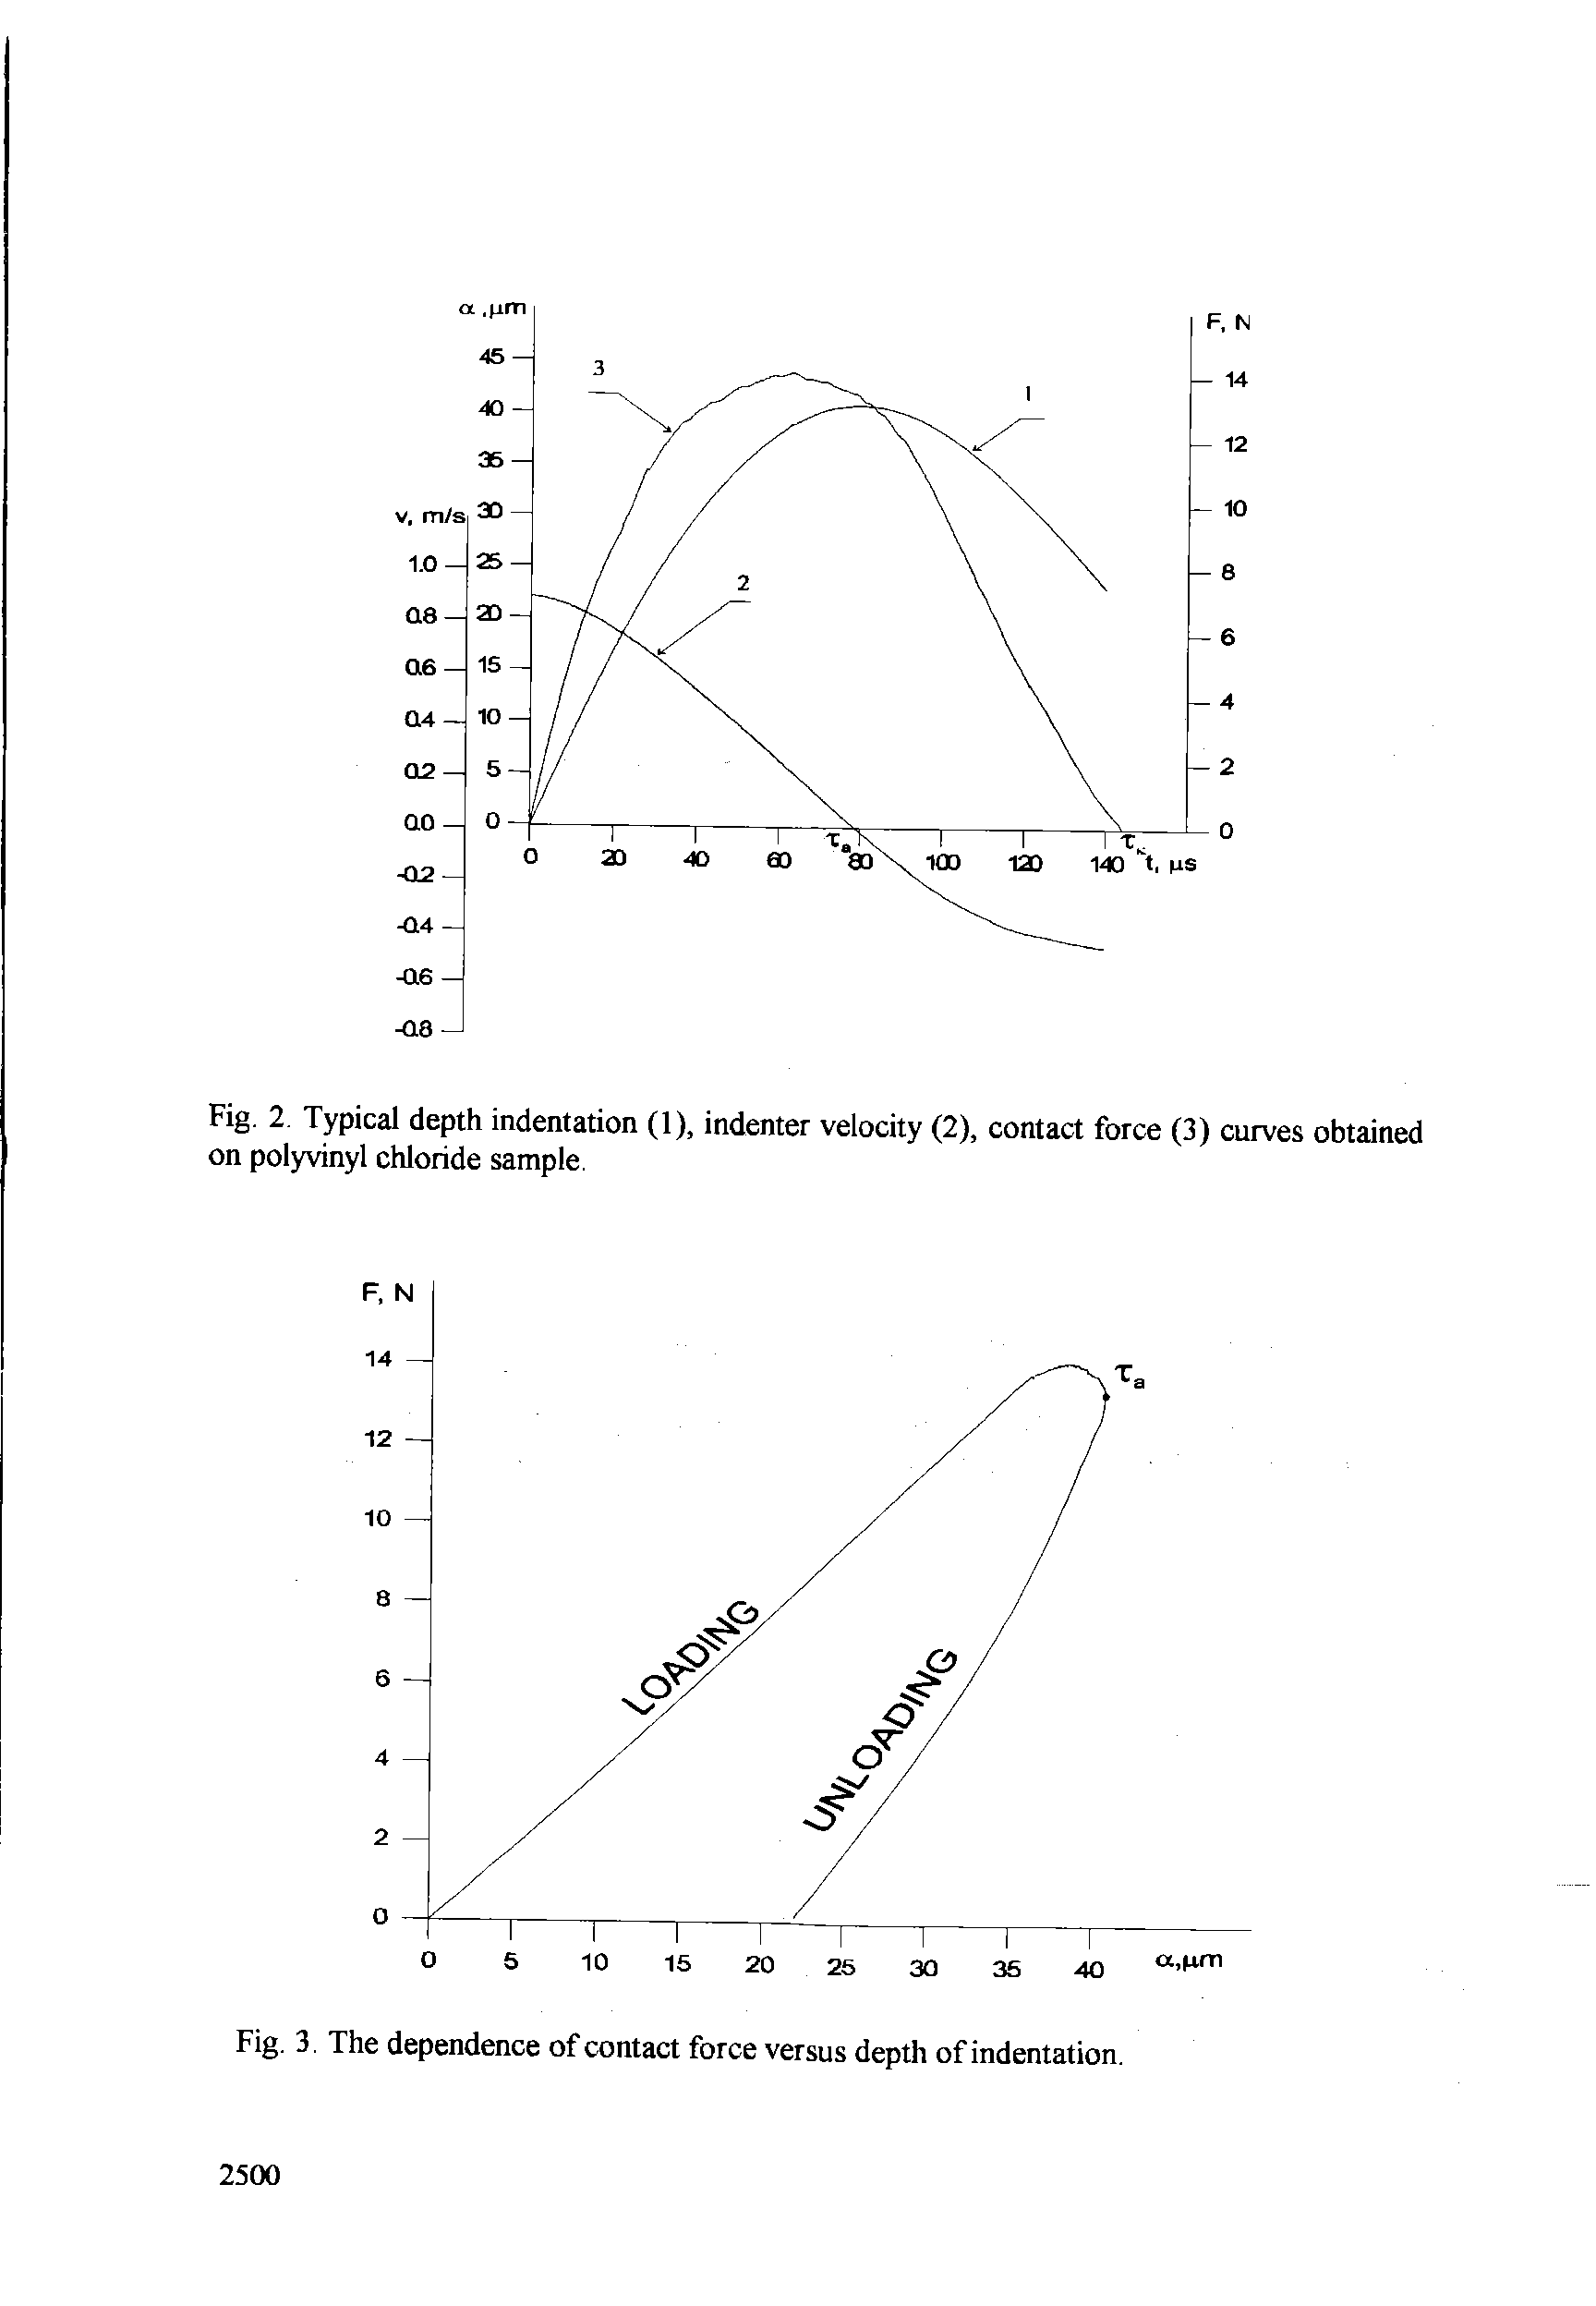 Fig. 2 Typical depth indentation (1), indenter velocity (2), contact force (3) curves obtained on polyvinyl cWoride sample.